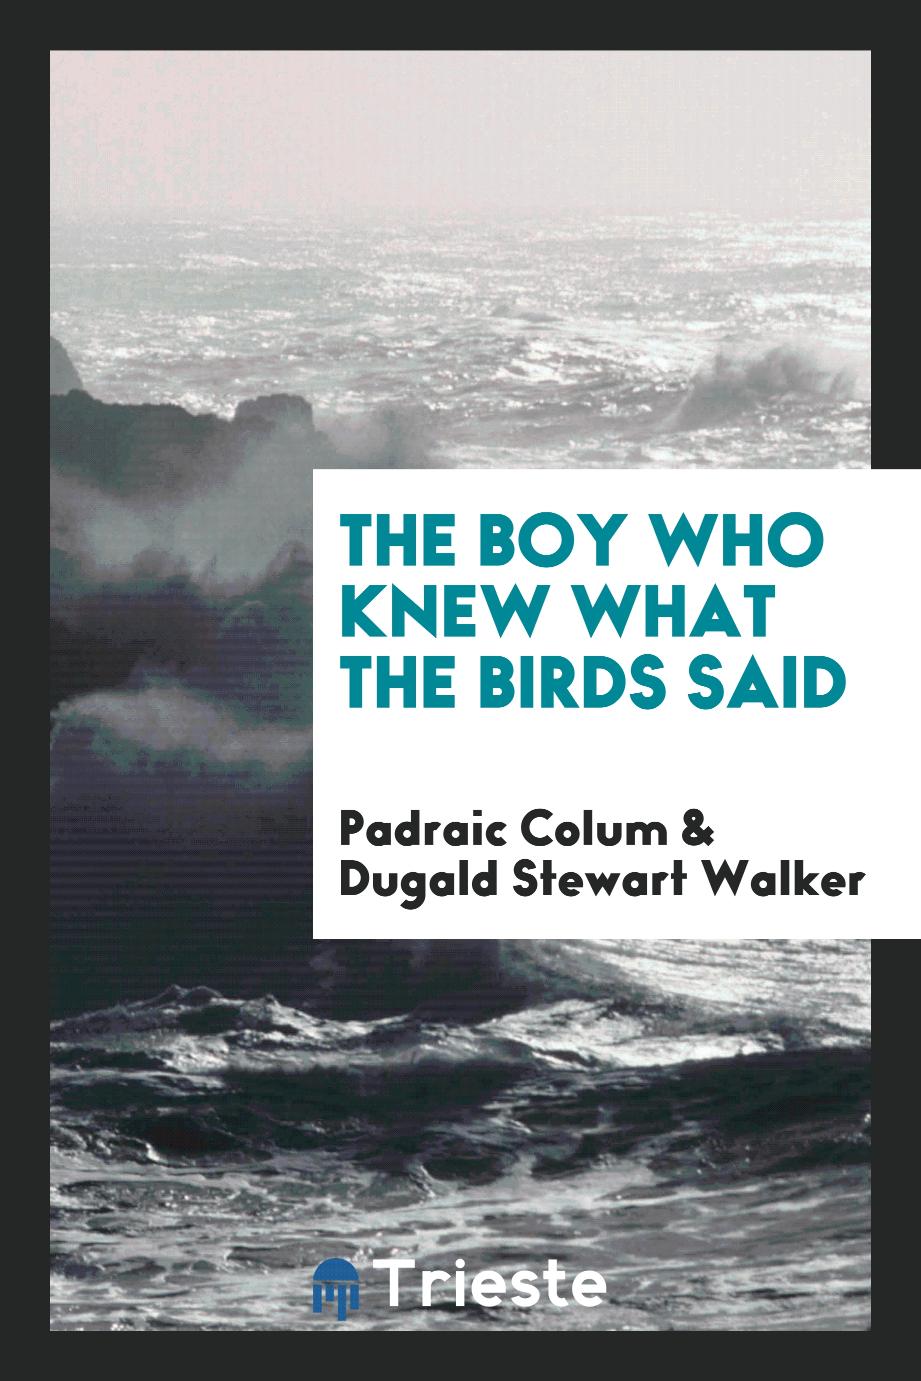 The Boy Who Knew What the Birds Said